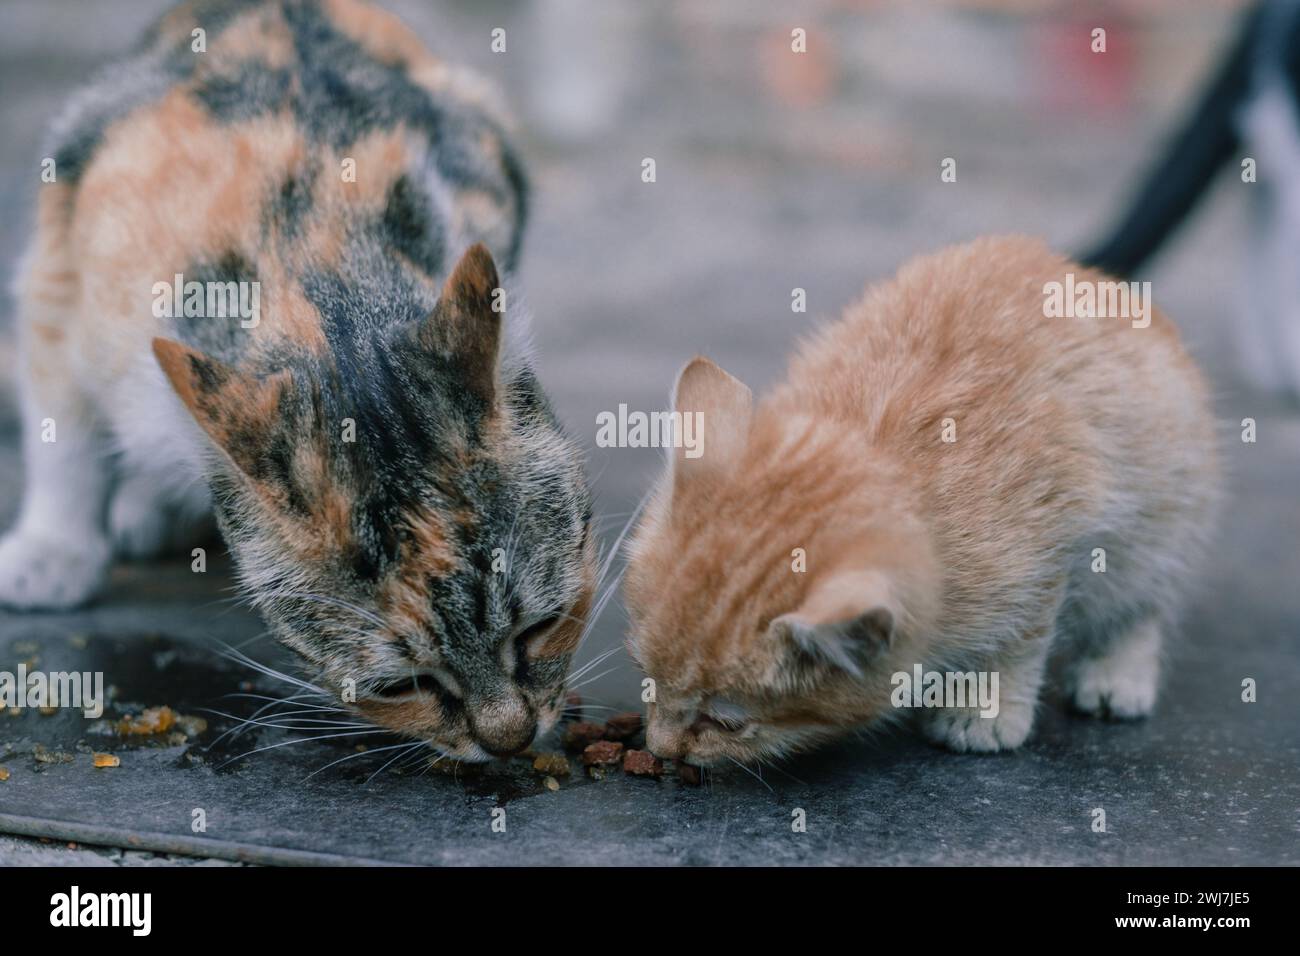 A stray stray cat with a kitten eating food, helping homeless animals, cat diseases. Adult Tricolor Cat and Kitten Sharing a Meal on a Pavement.  Stock Photo